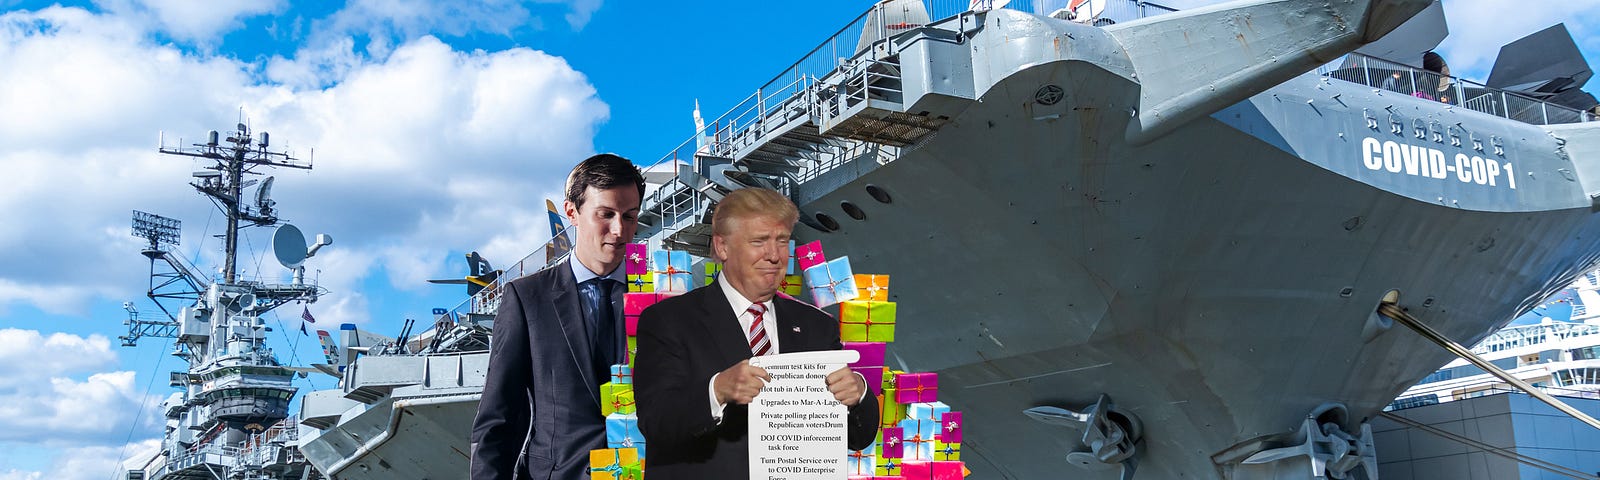 Trump and Jared Kushner with a pile of gifts in front of aircraft carrier